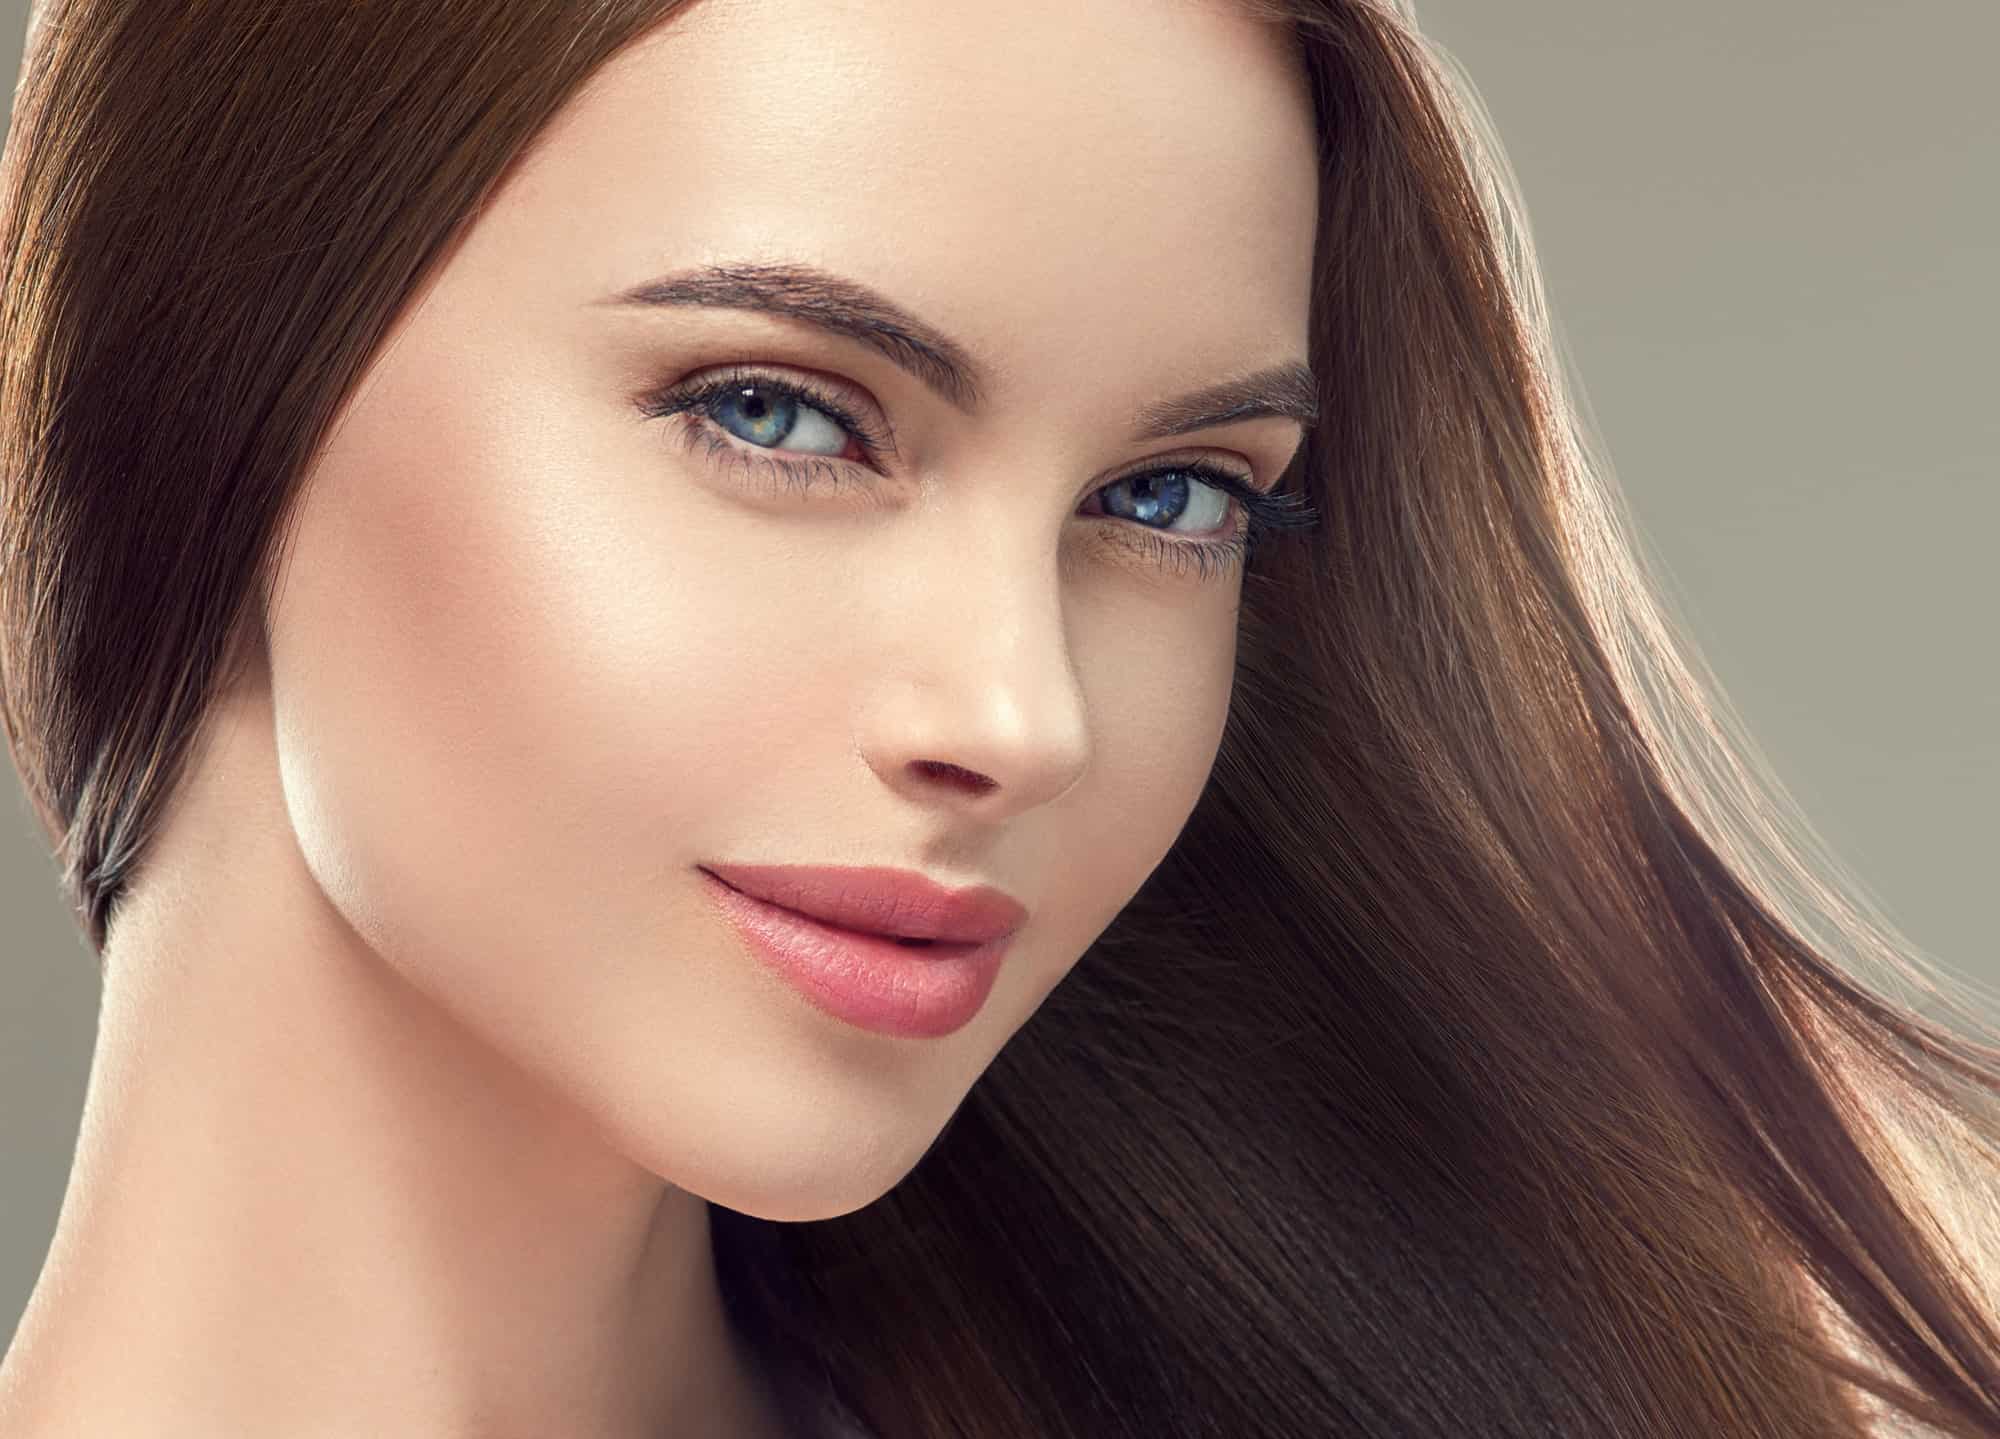 Woman with long smooth hair beautiful hairstyle fashion make up